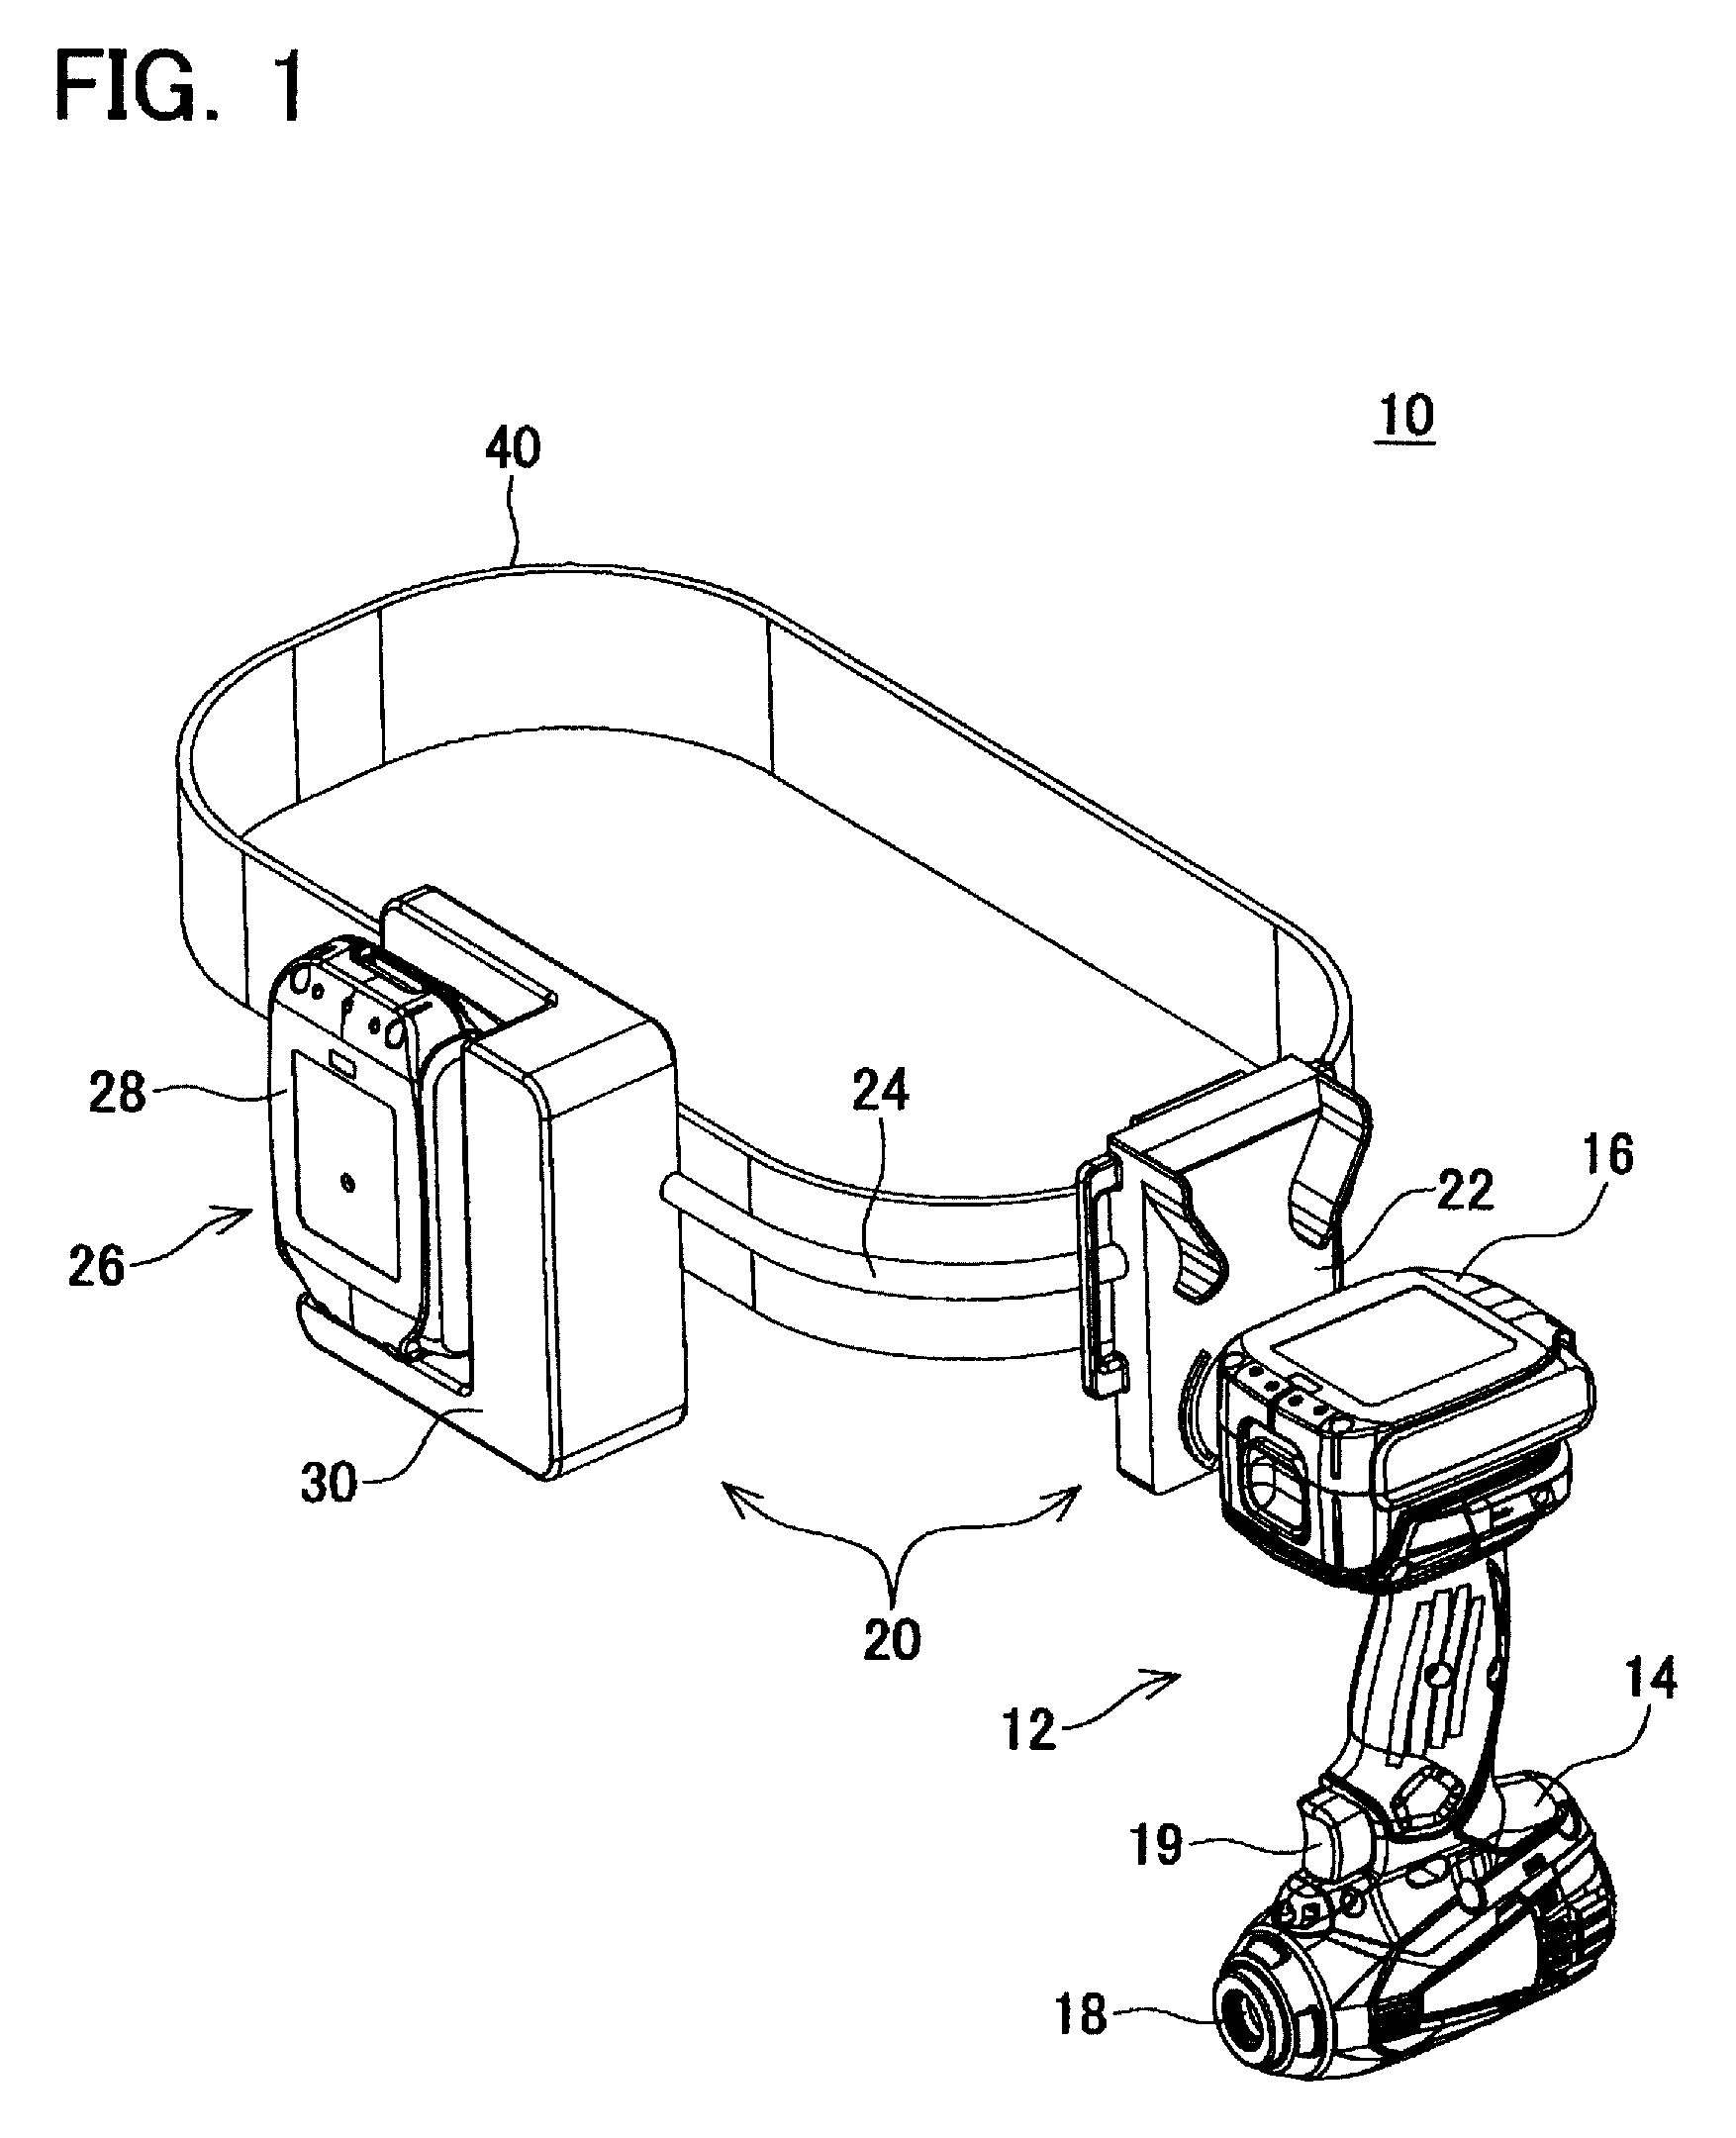 Charger for hand-held power tool, power tool system and method of charging a power tool battery